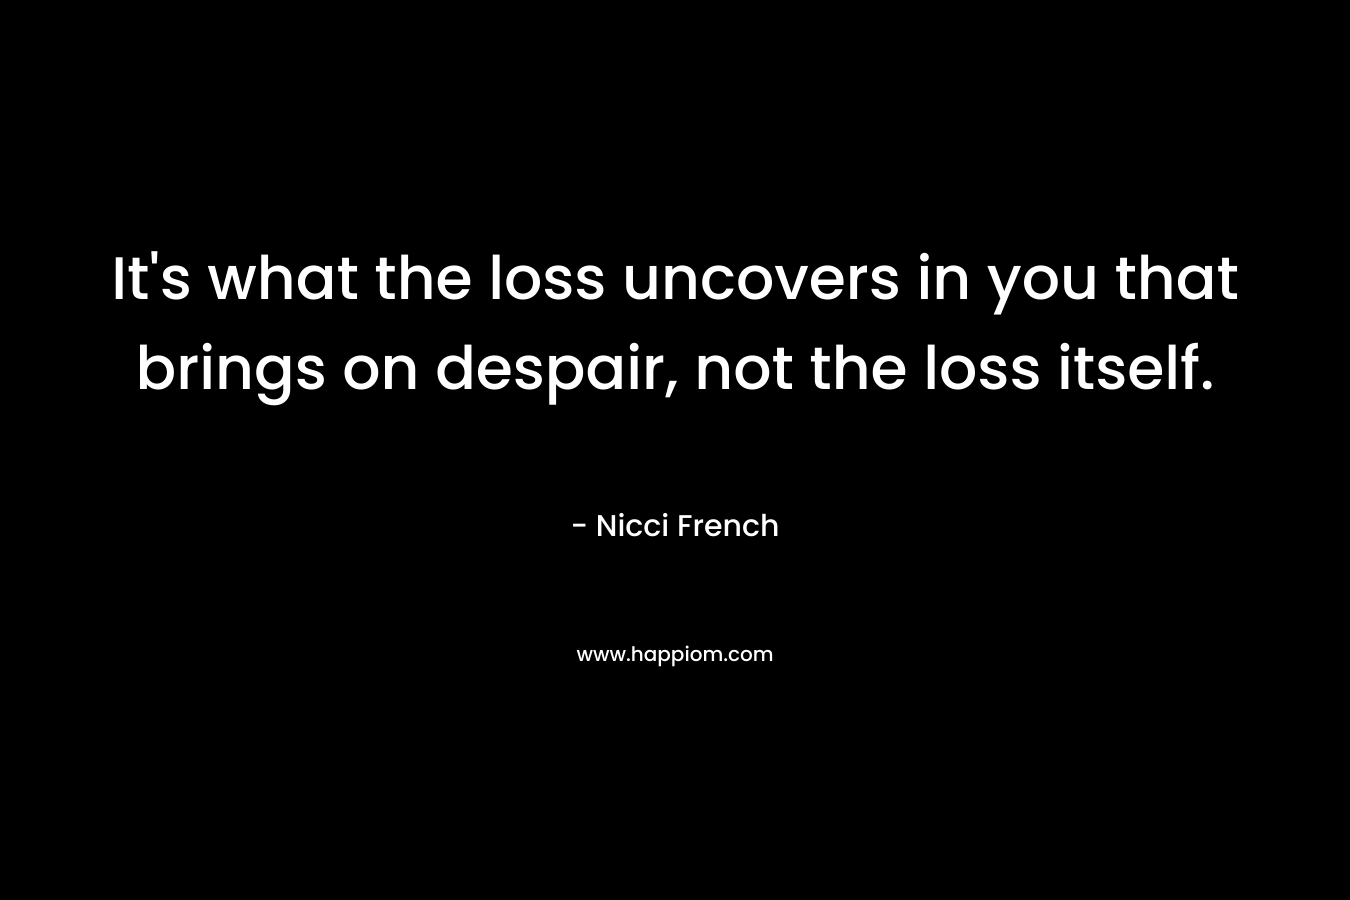 It's what the loss uncovers in you that brings on despair, not the loss itself.